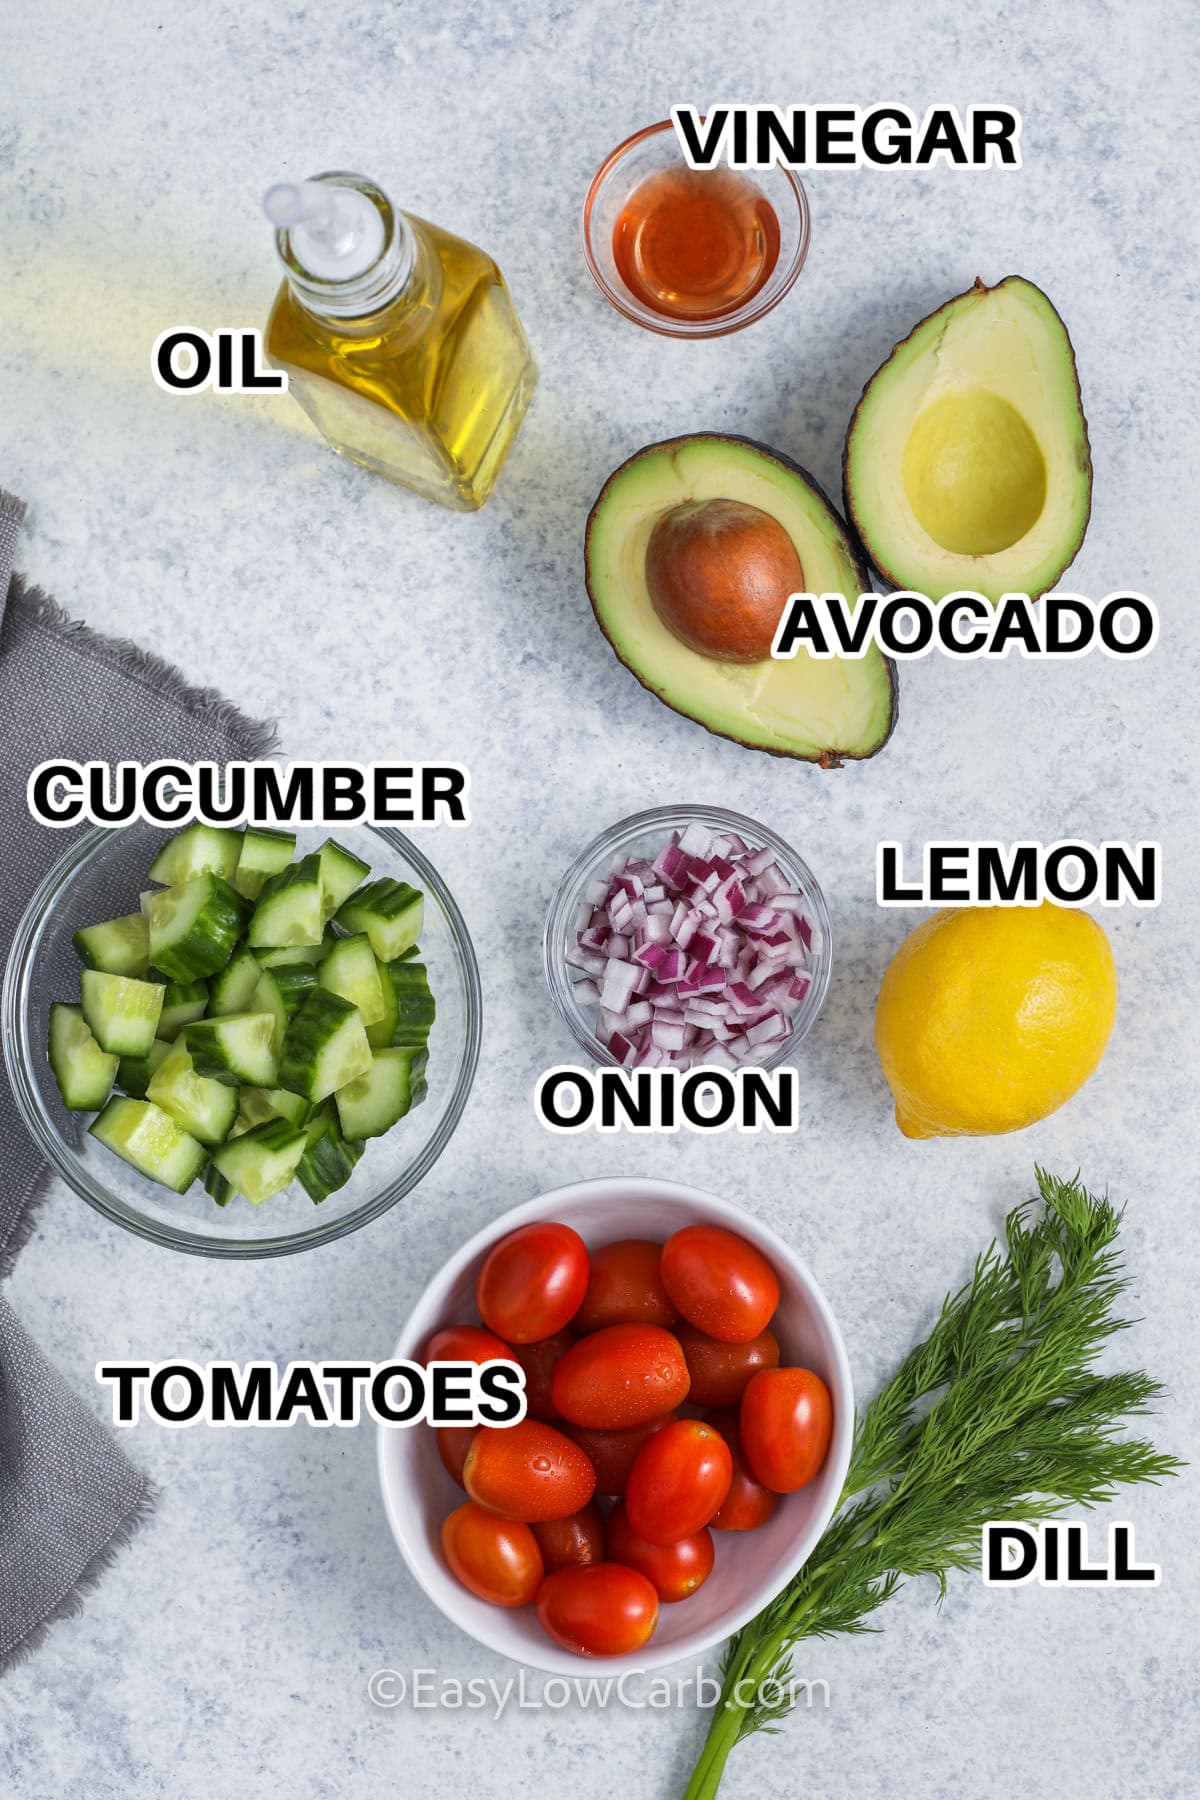 oil vinegar avocado cucumber onion lemon tomatoes and dill with labels to make Cucumber Tomato Avocado Salad